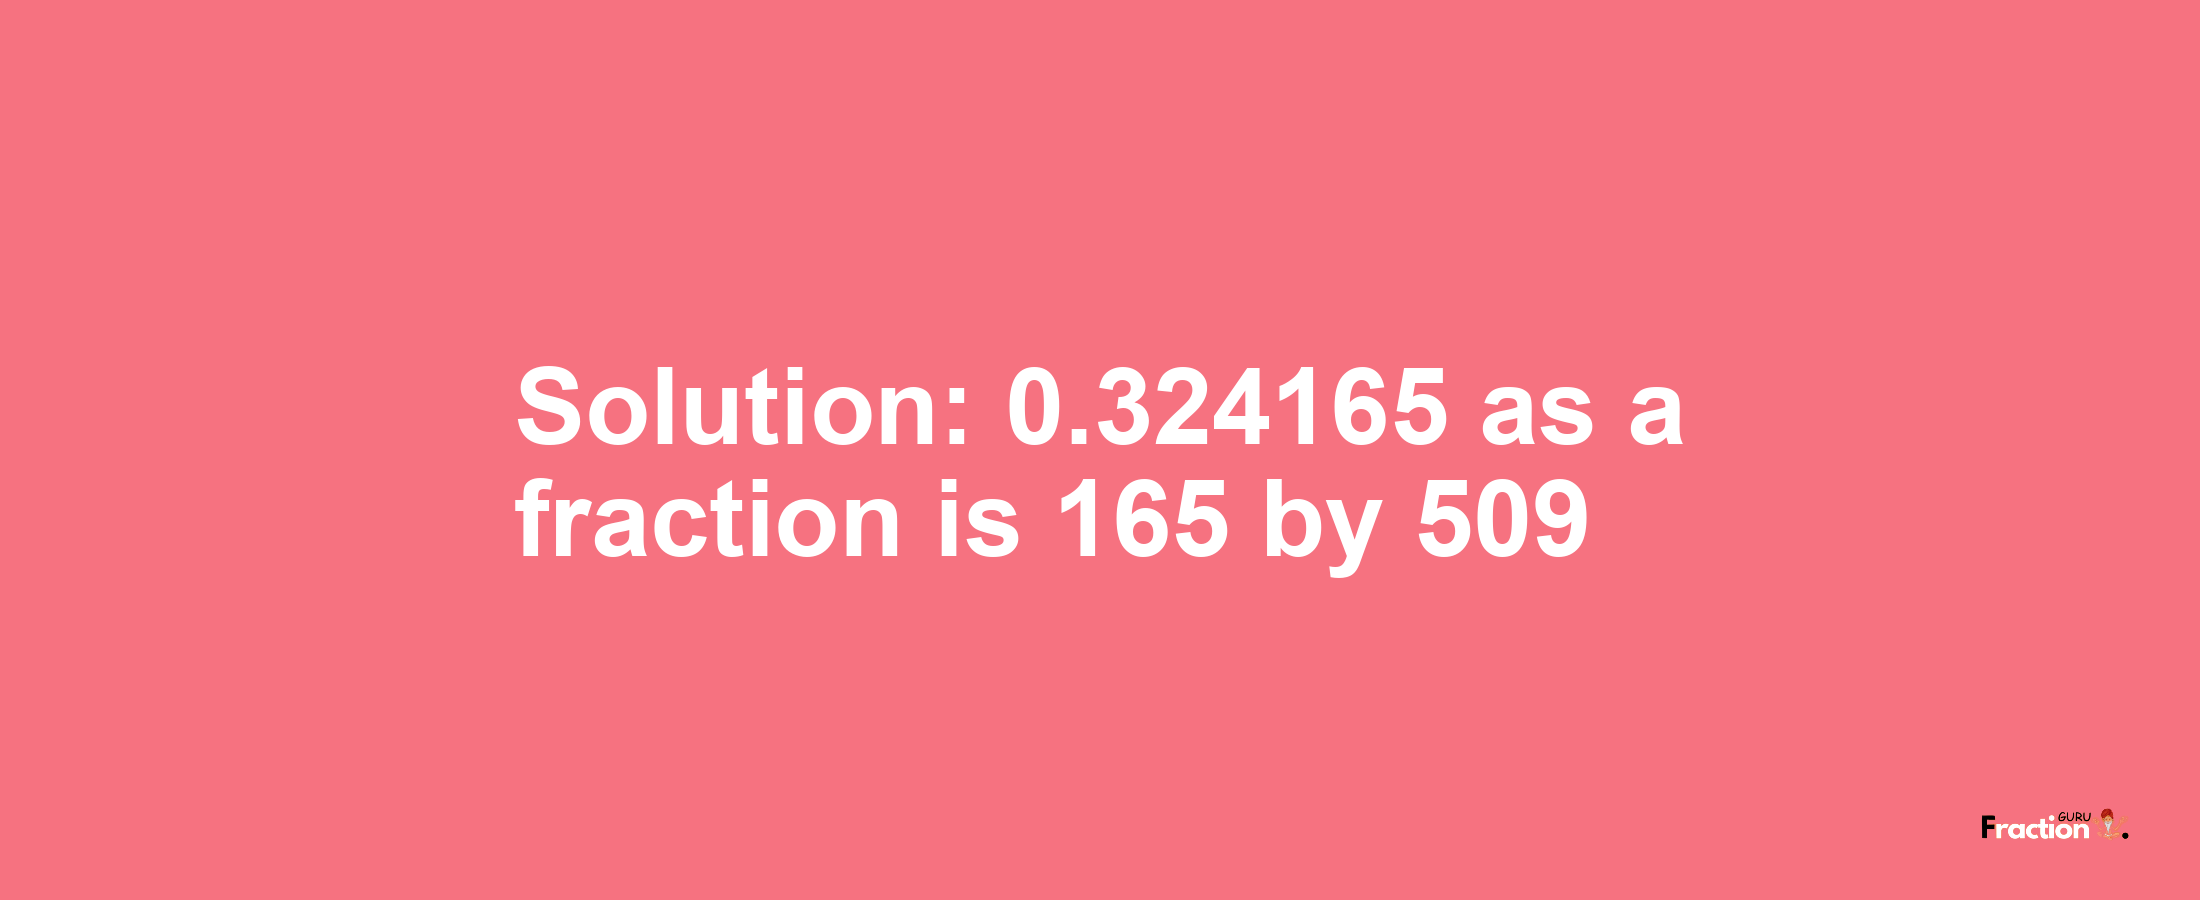 Solution:0.324165 as a fraction is 165/509